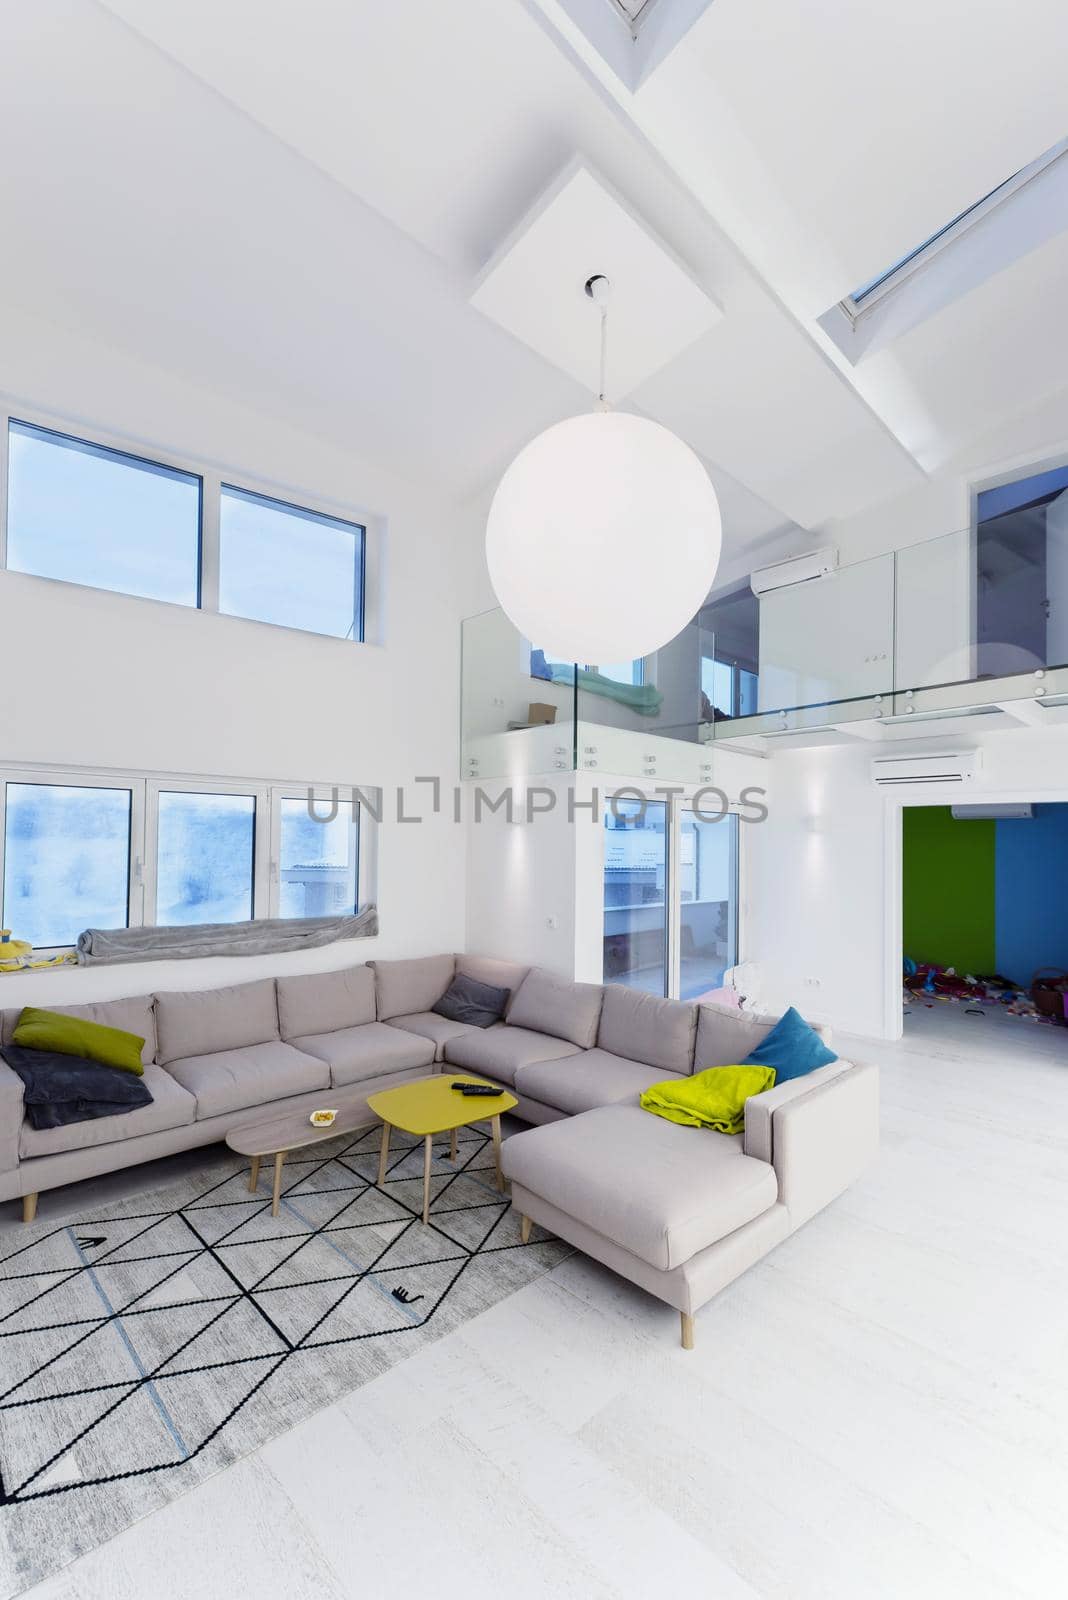 interior of a luxury stylish modern open space design two level apartment with white walls